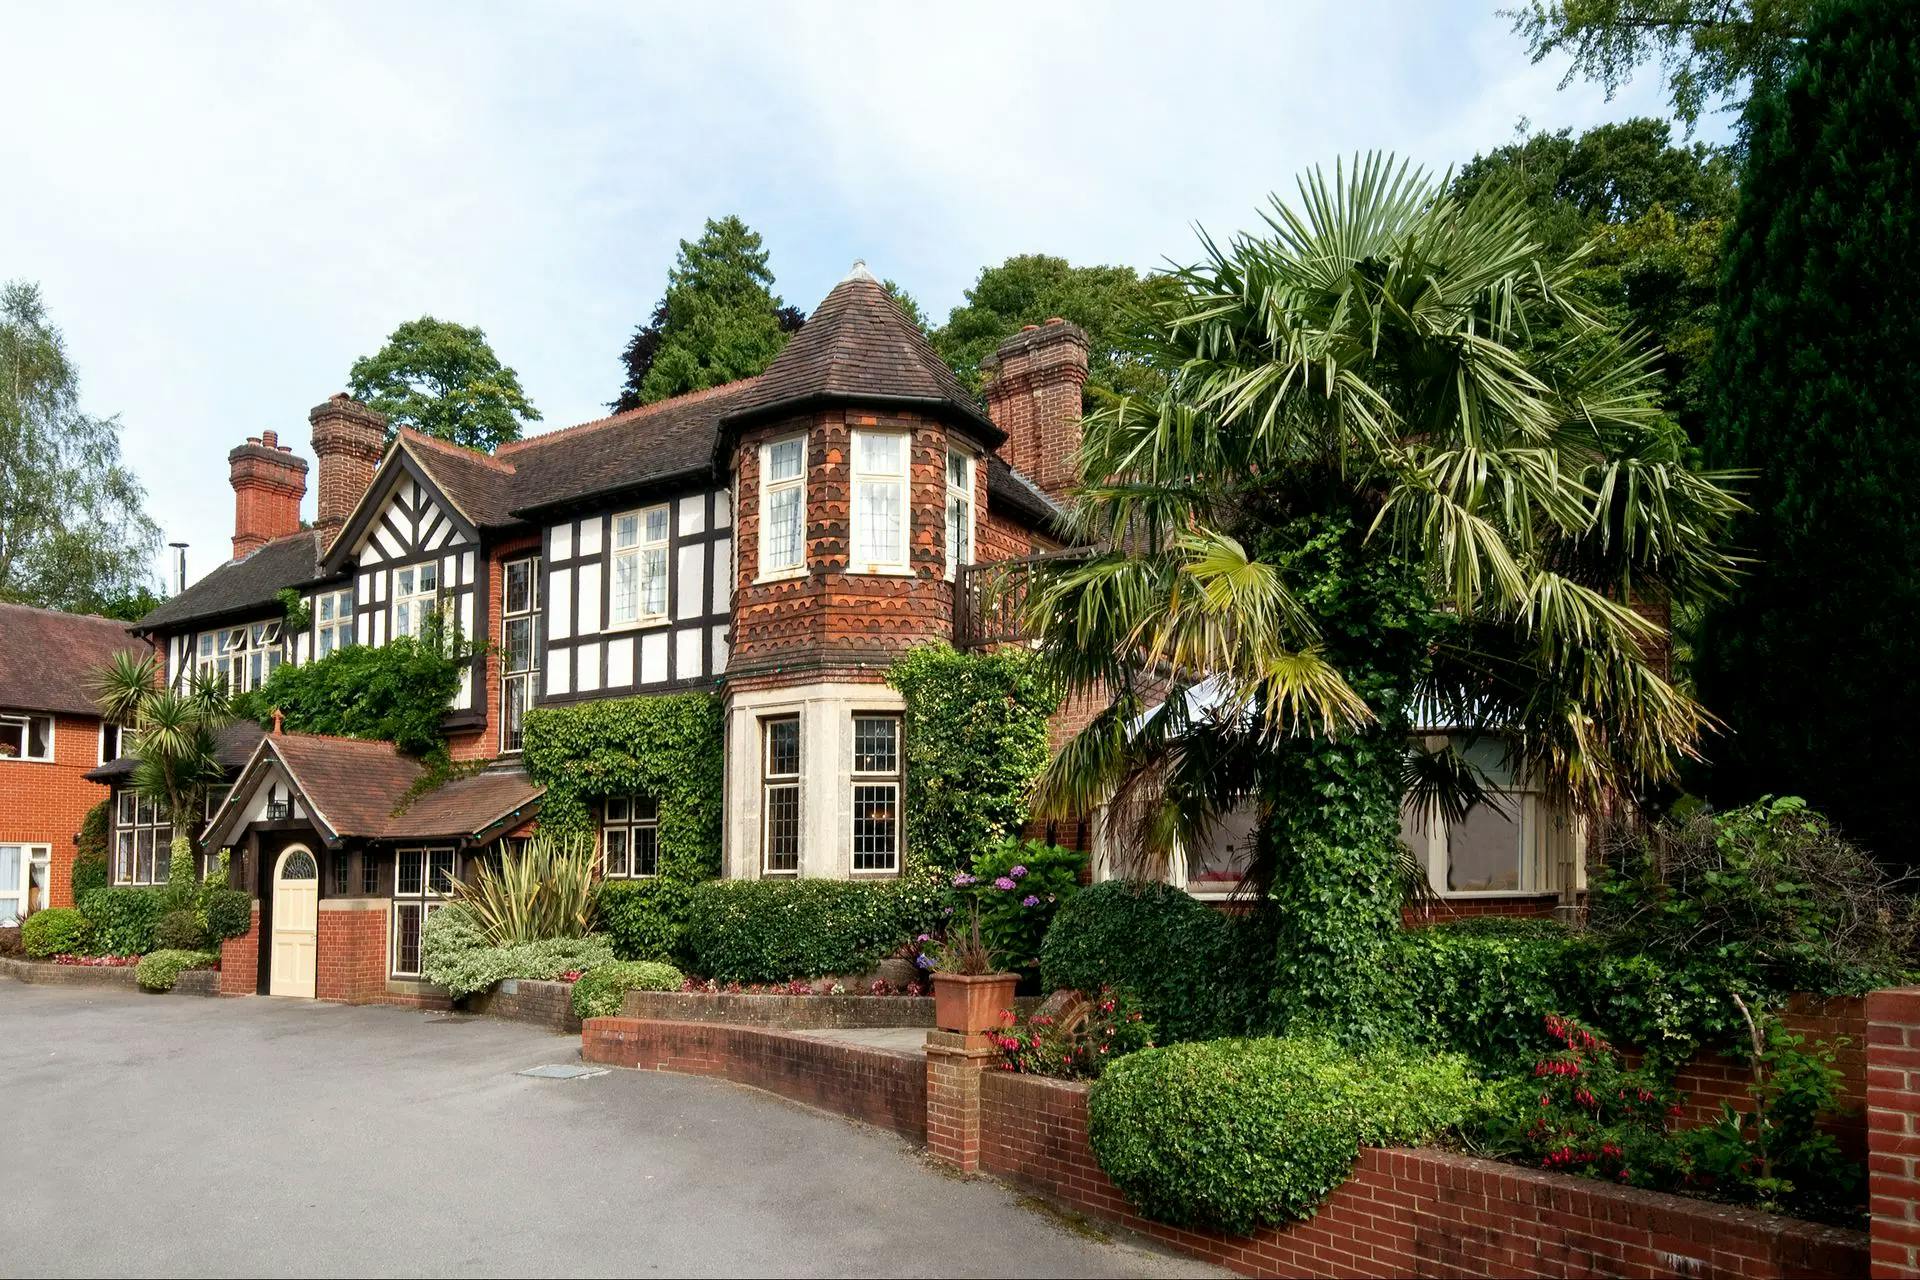 Exterior of Garth House Care Home in Dorking, Mole Valley